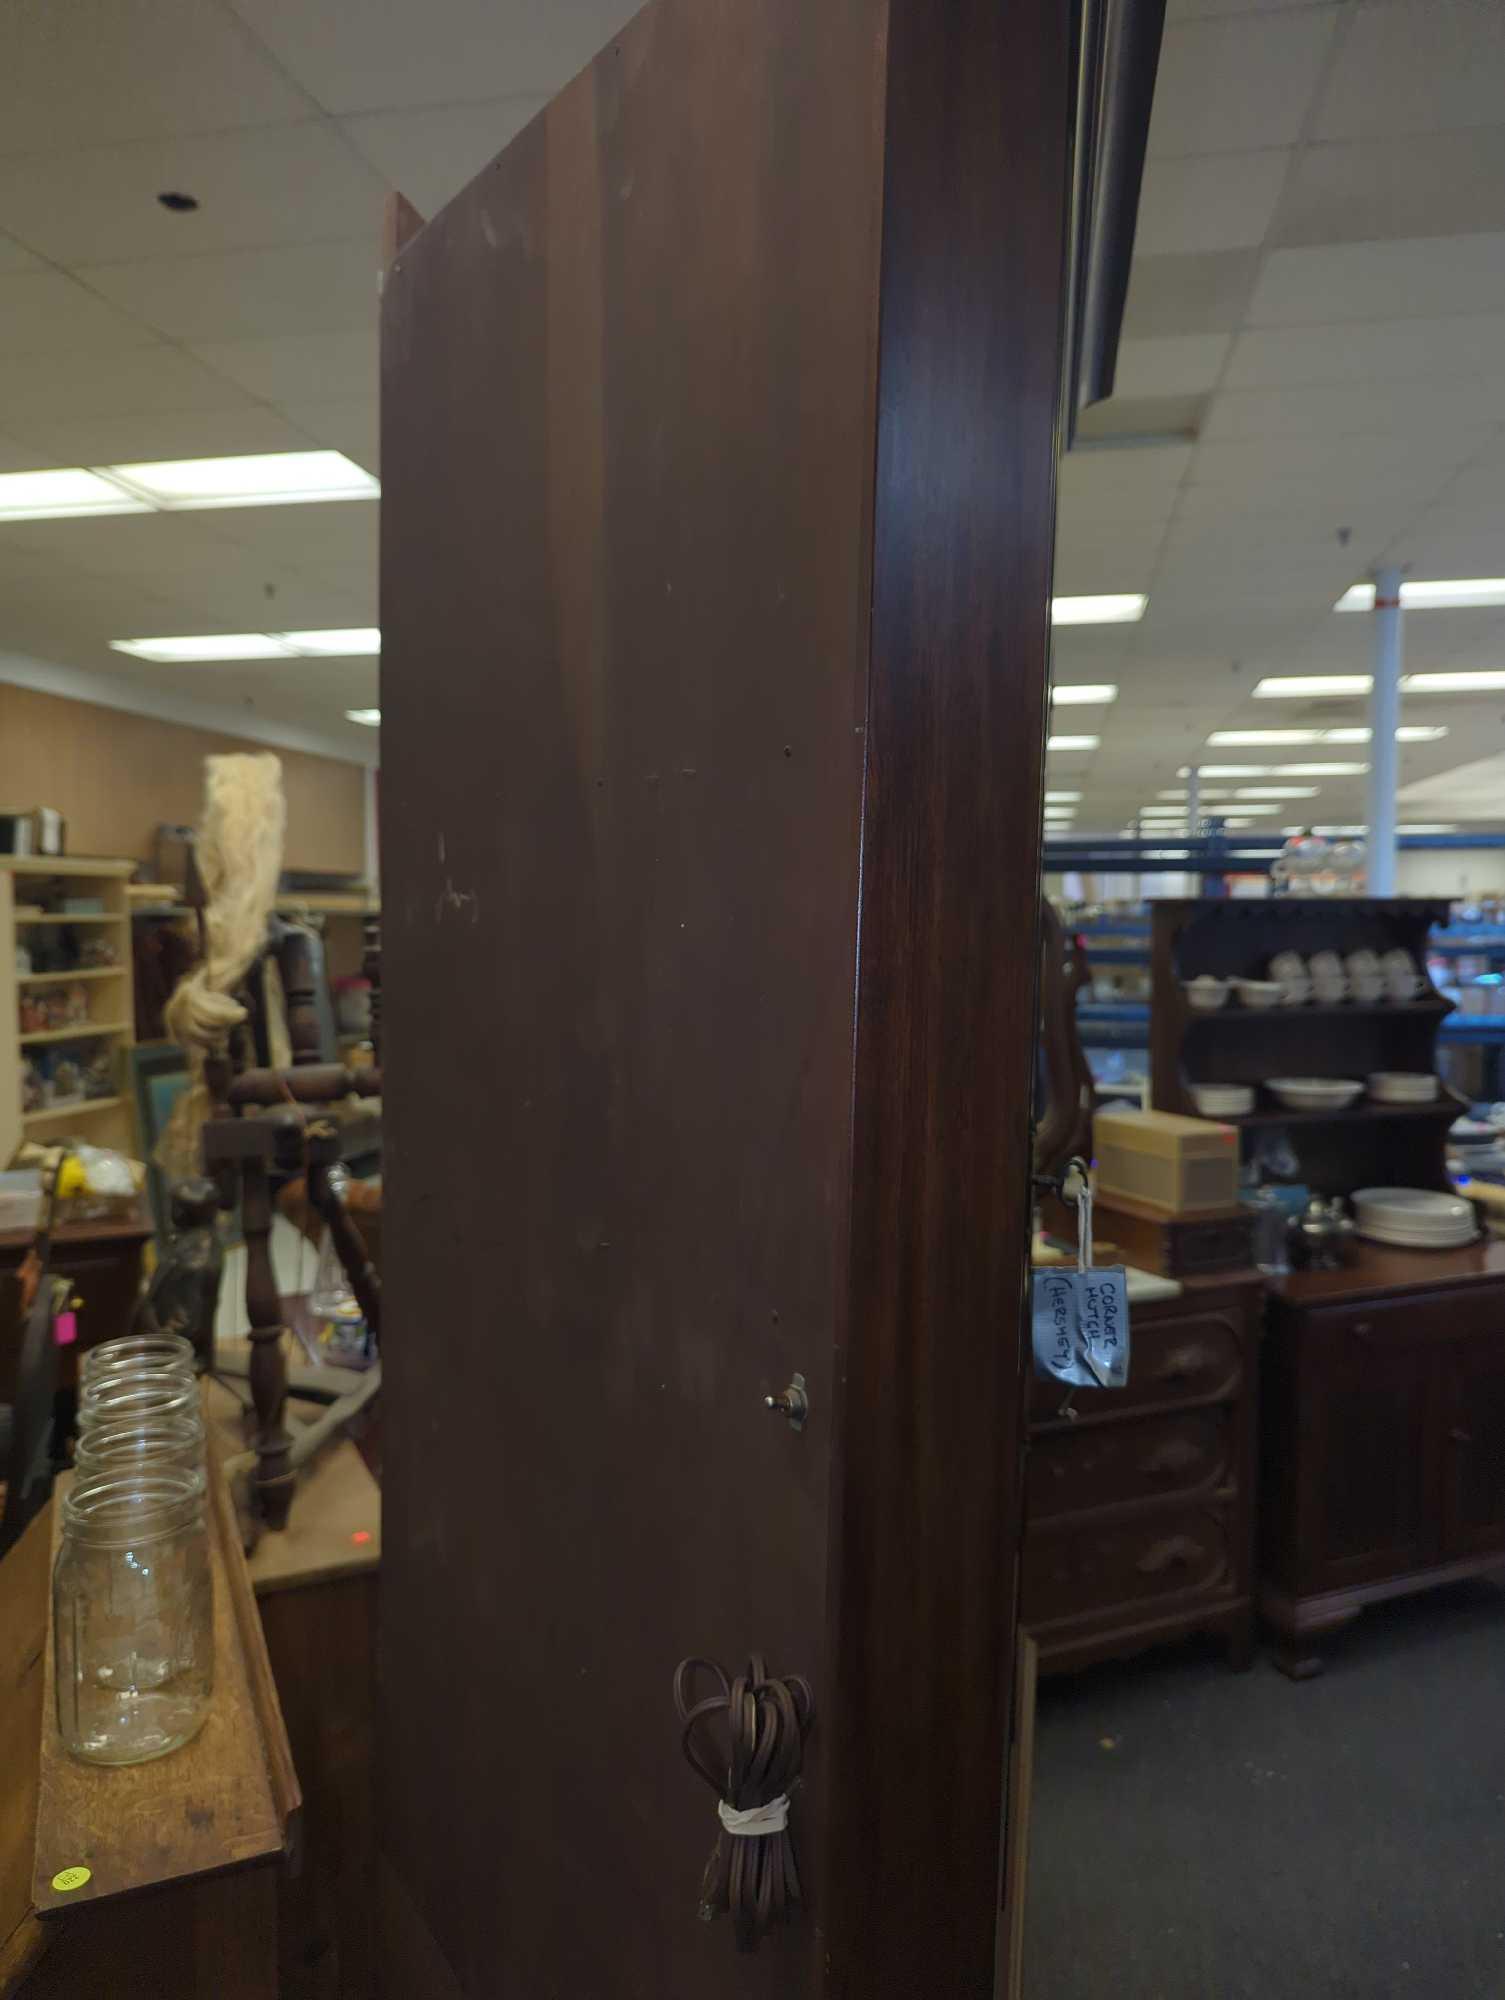 Henkel-Harris Co. Chippendale Style Solid Mahogany Corner Cabinet with Original Finish, 12 Pane